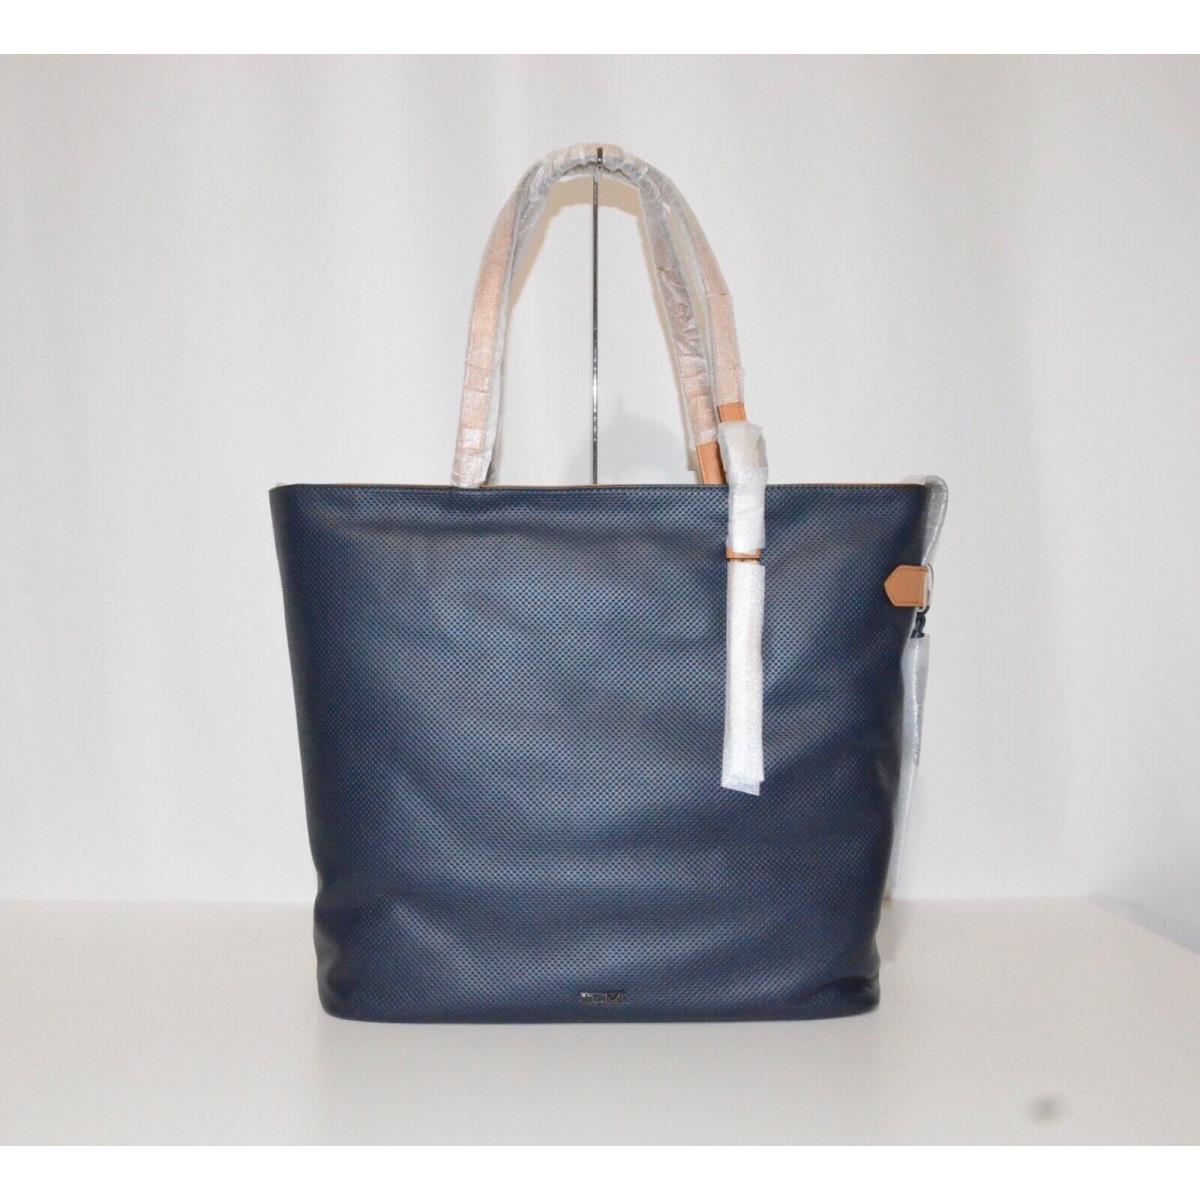 Tumi Nora Tote Travel Bag Navy Color All Leather